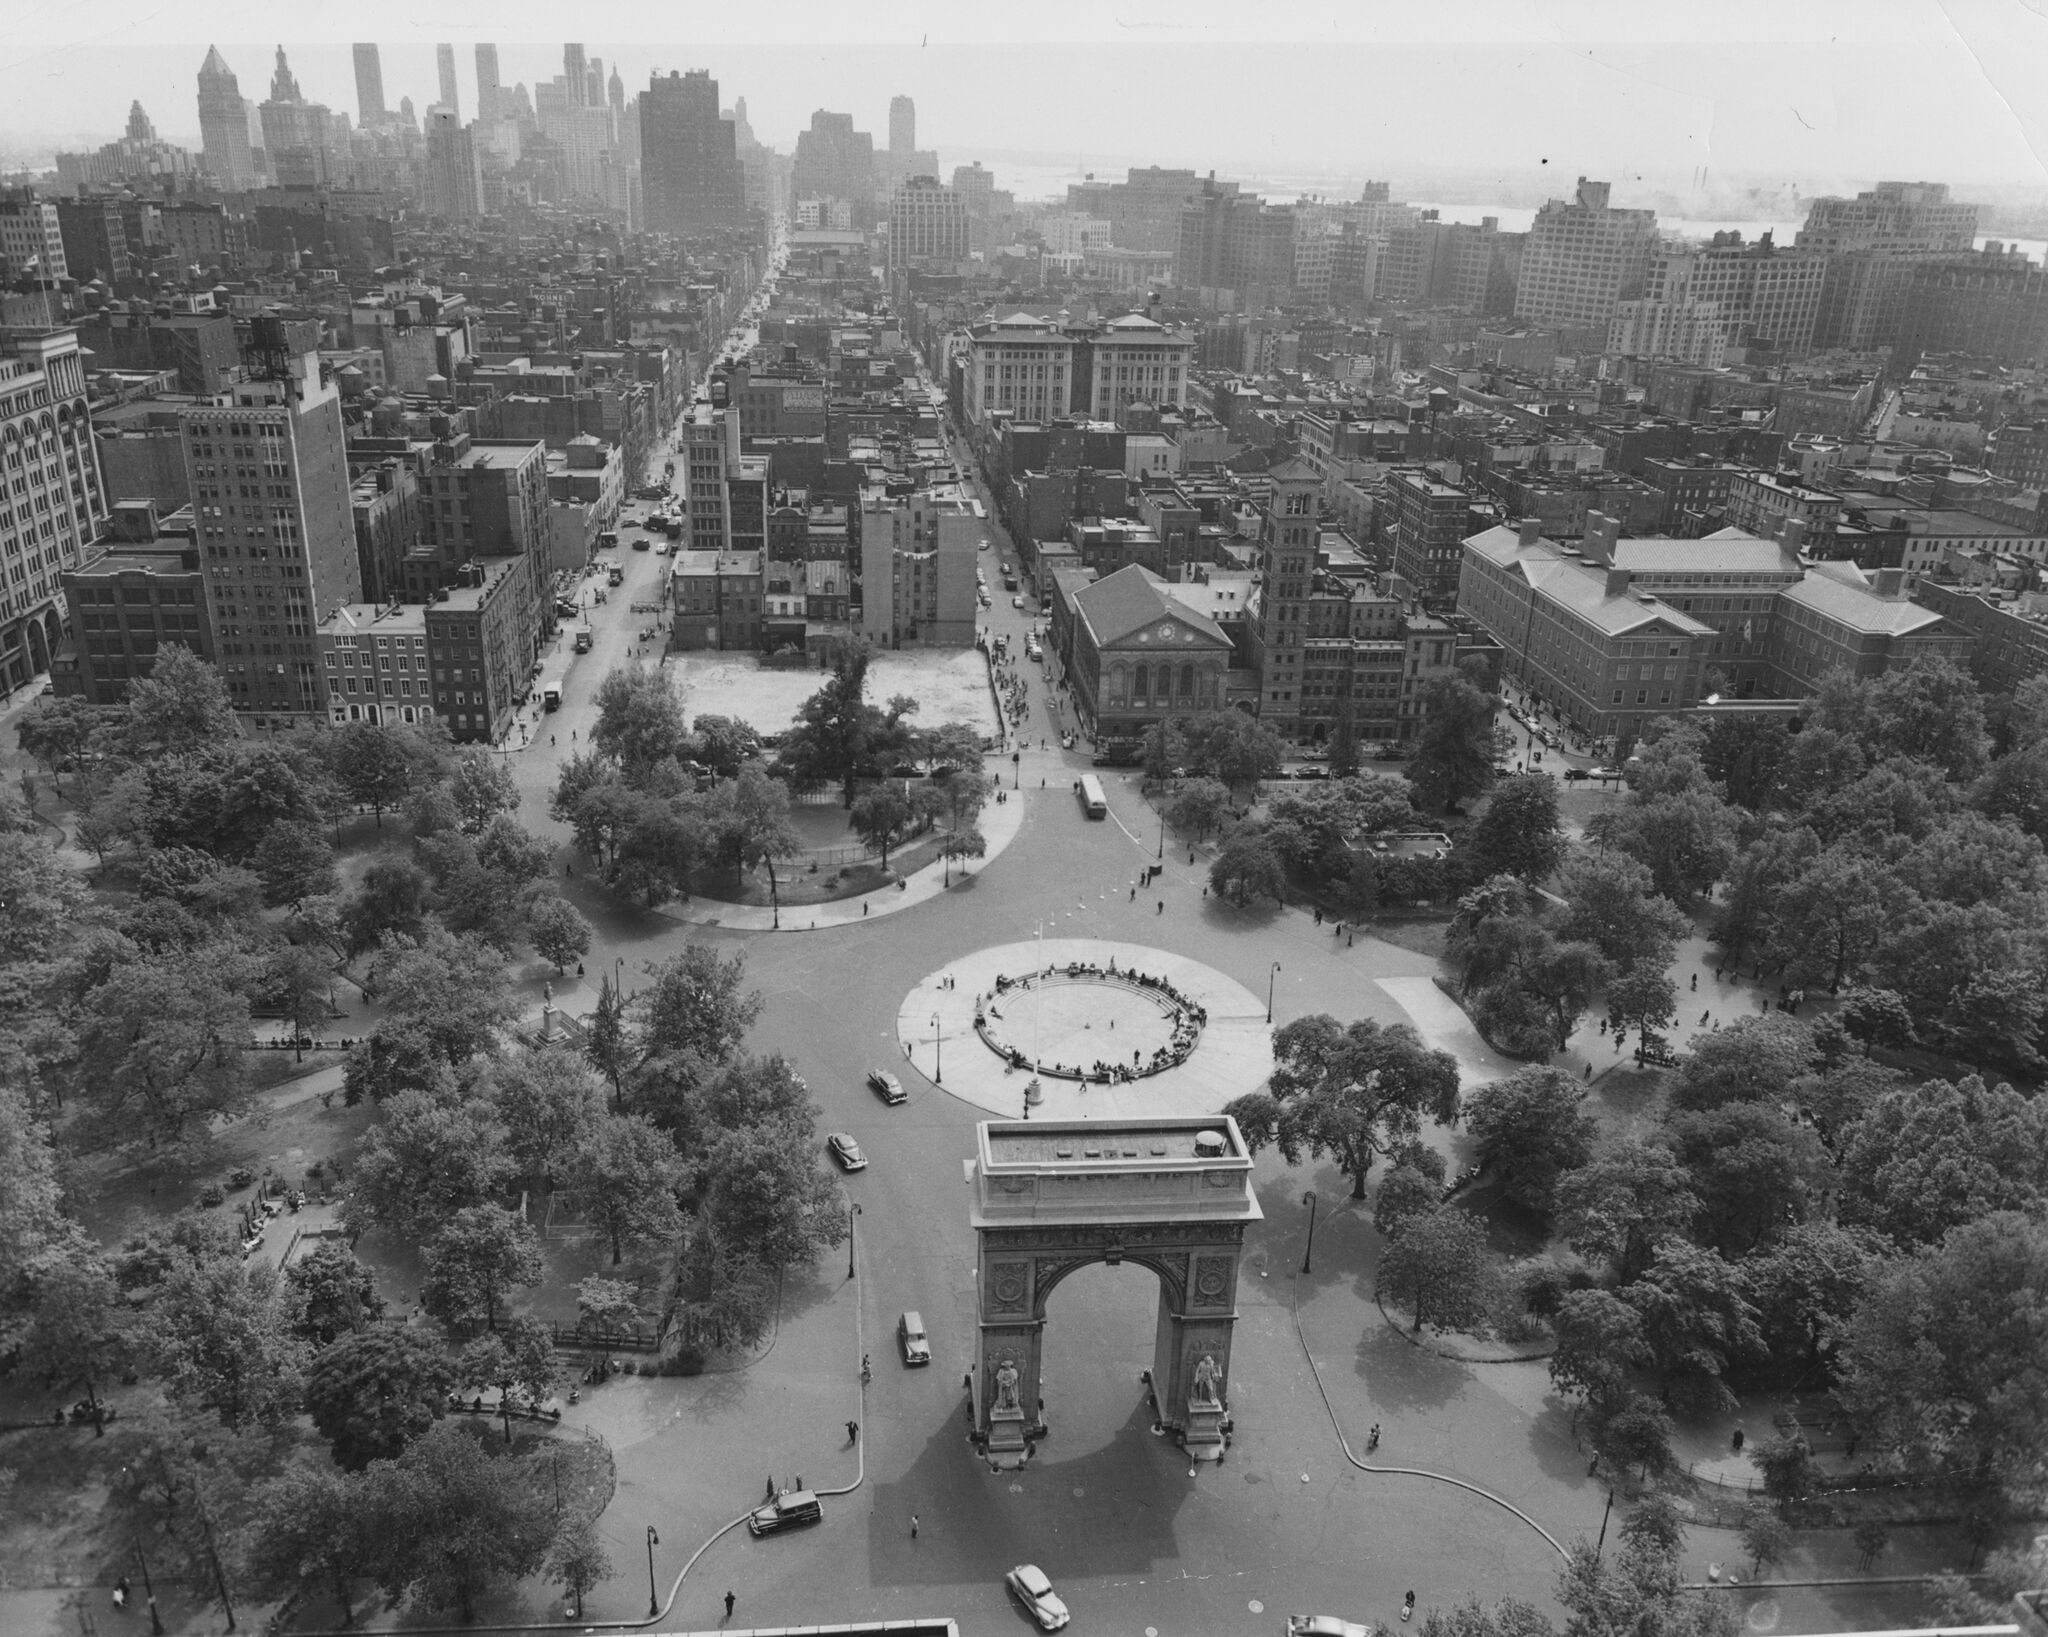 An aerial view of Washington Square Park with a city skyline in the background.